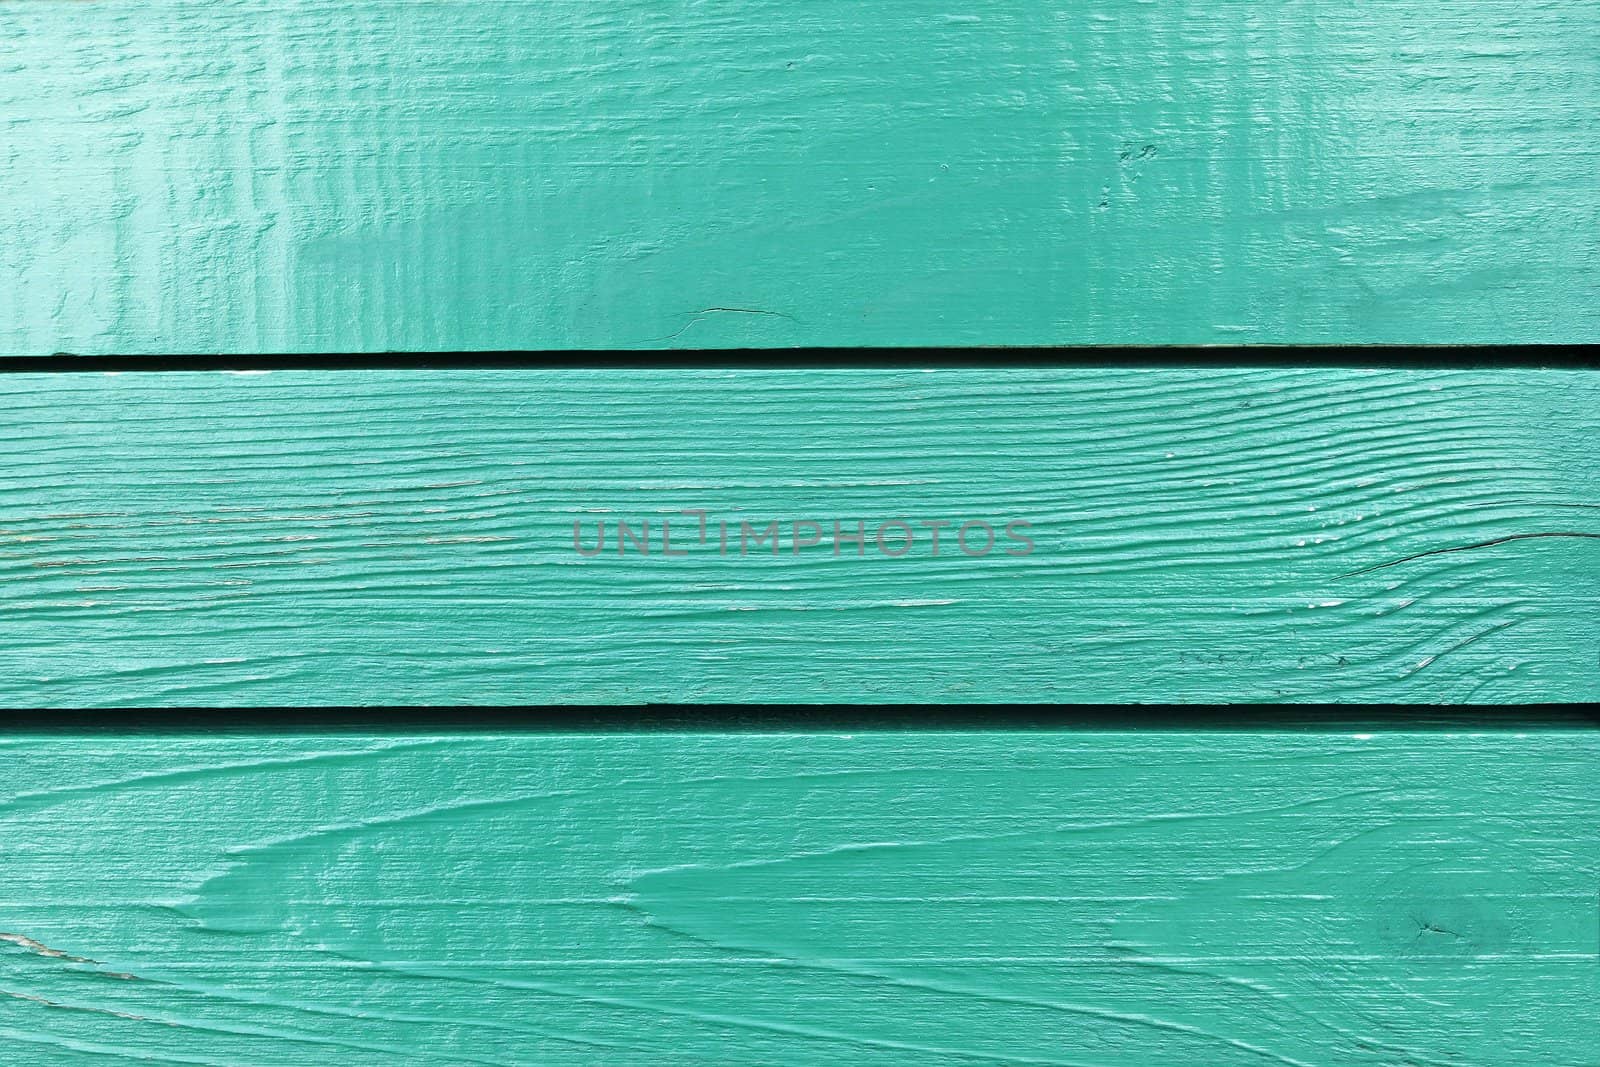 Fragment of wooden fence painted in bright aquamarine